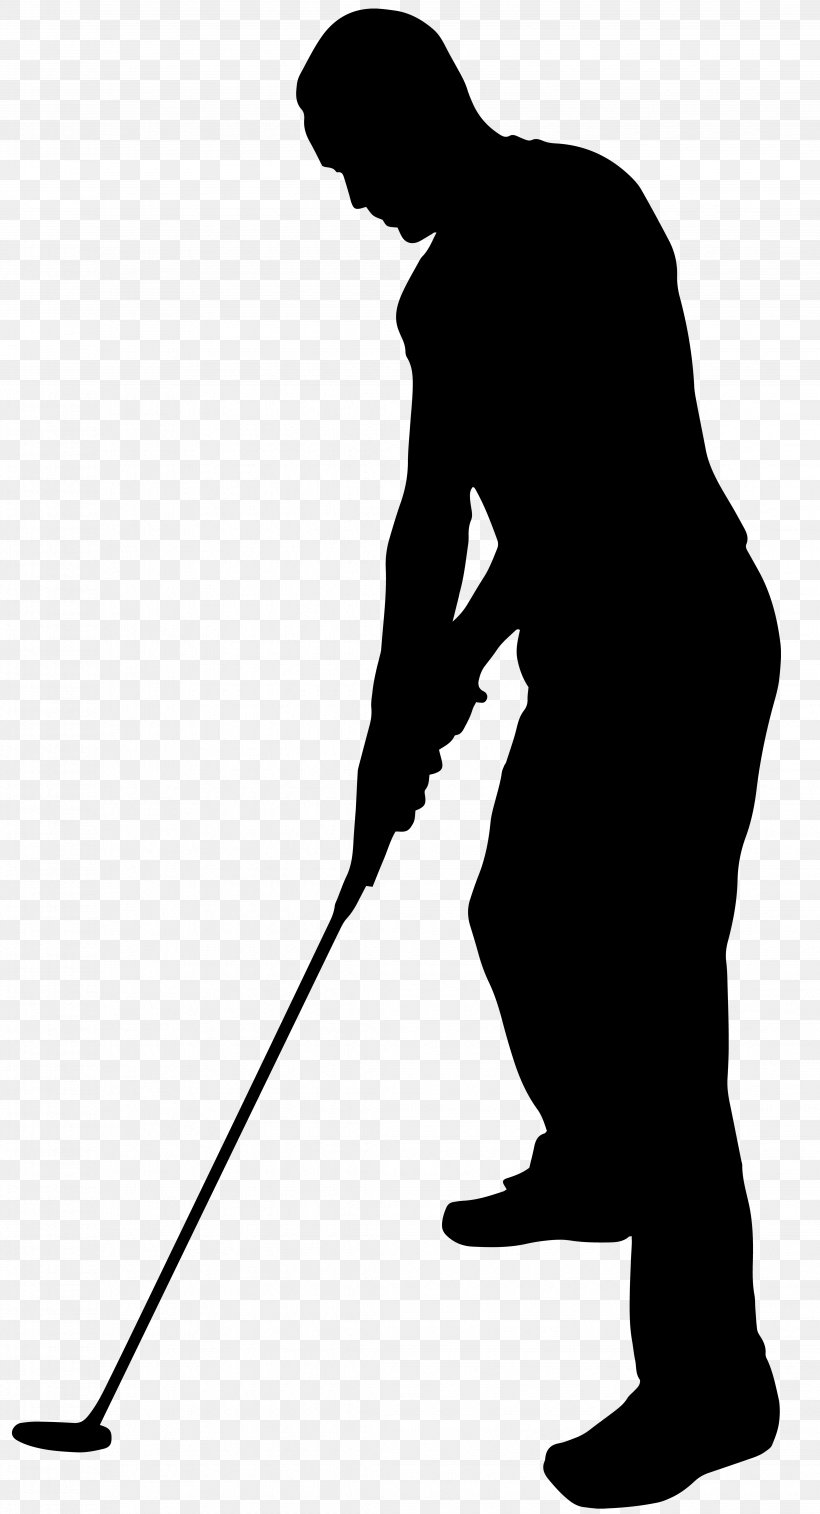 Image File Formats Lossless Compression, PNG, 4331x8000px, Silhouette, Black And White, Golf, Human Behavior, Joint Download Free